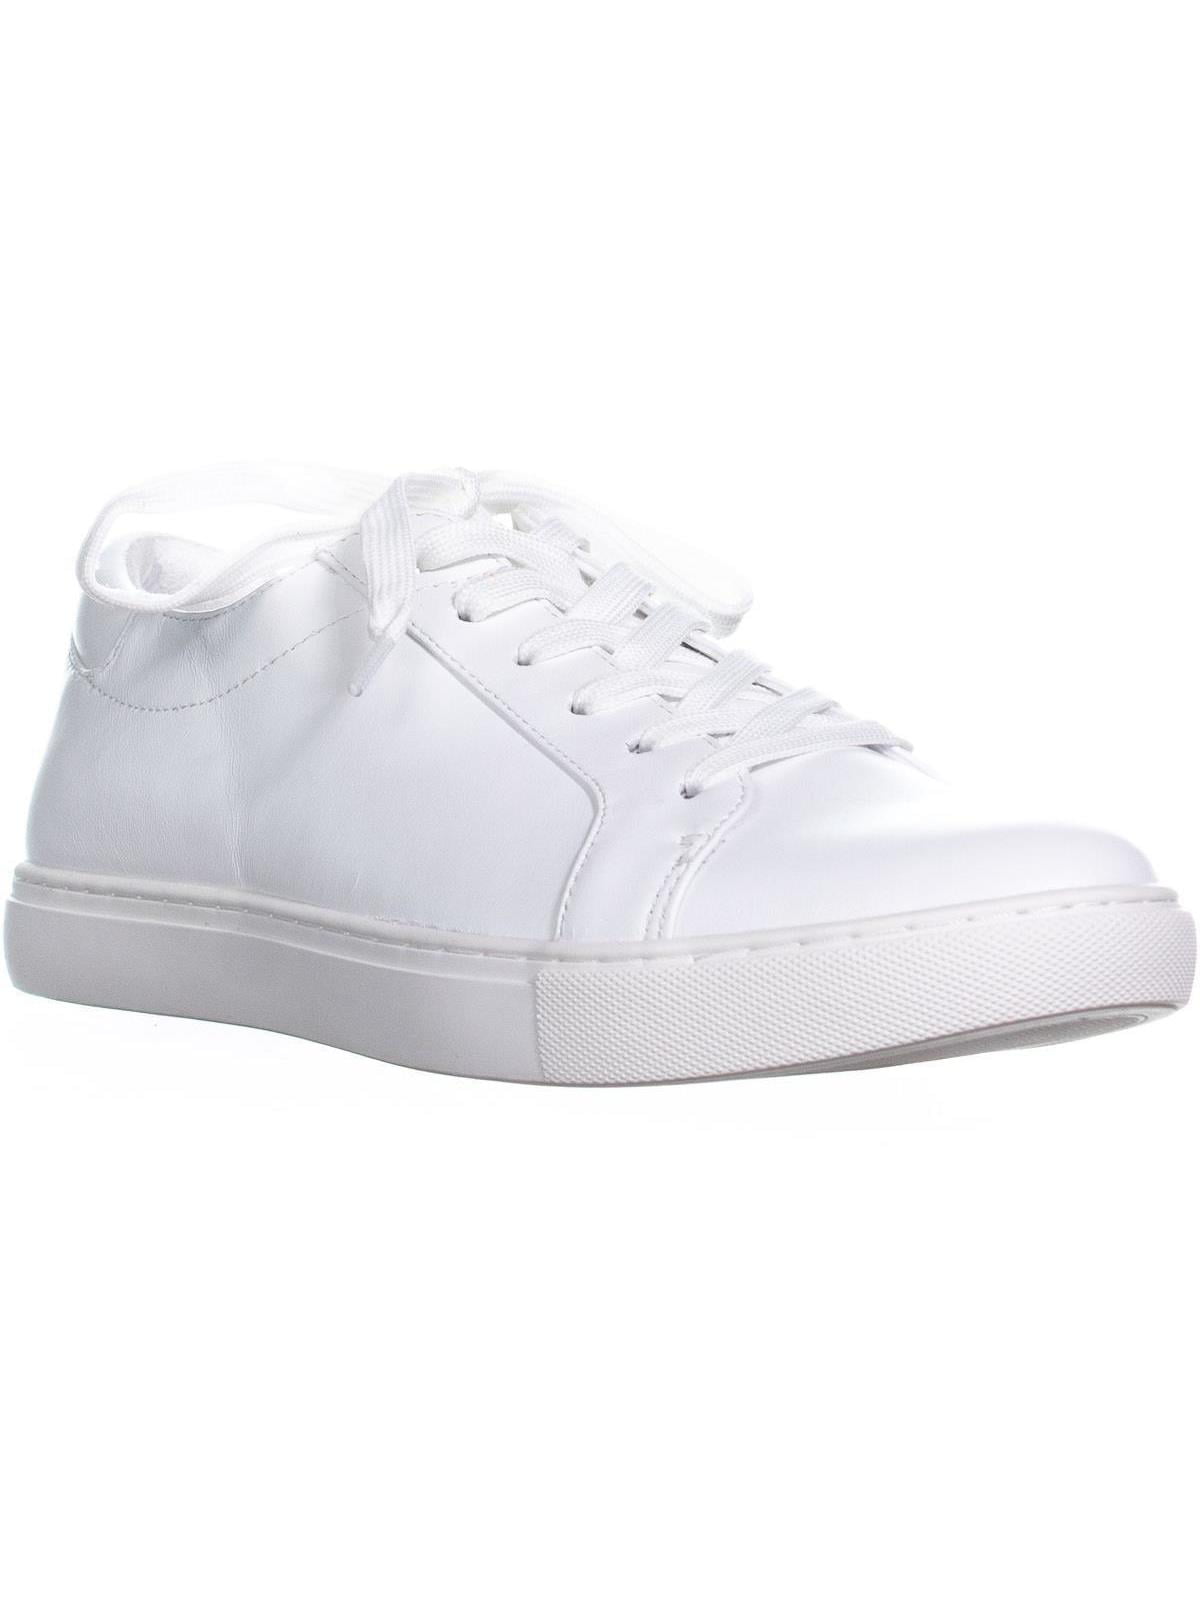 Womens Kenneth Cole Kam Pride Lace Up Sneakers, White, 9 US / 40 EU ...